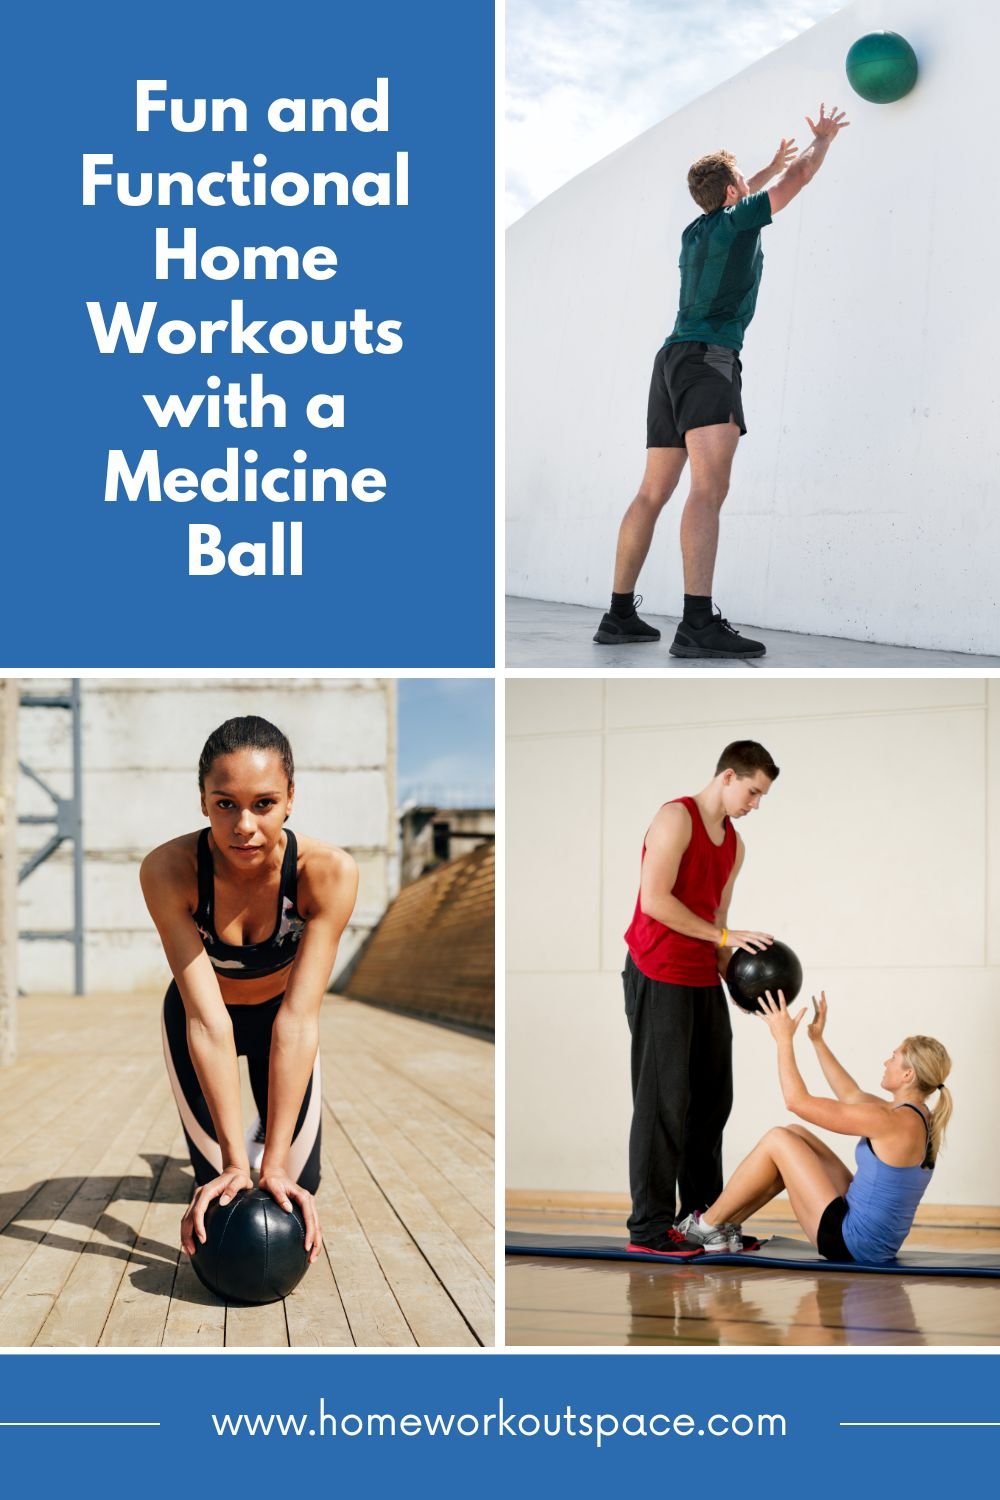 Fun and Functional Home Workouts with a Medicine Ball